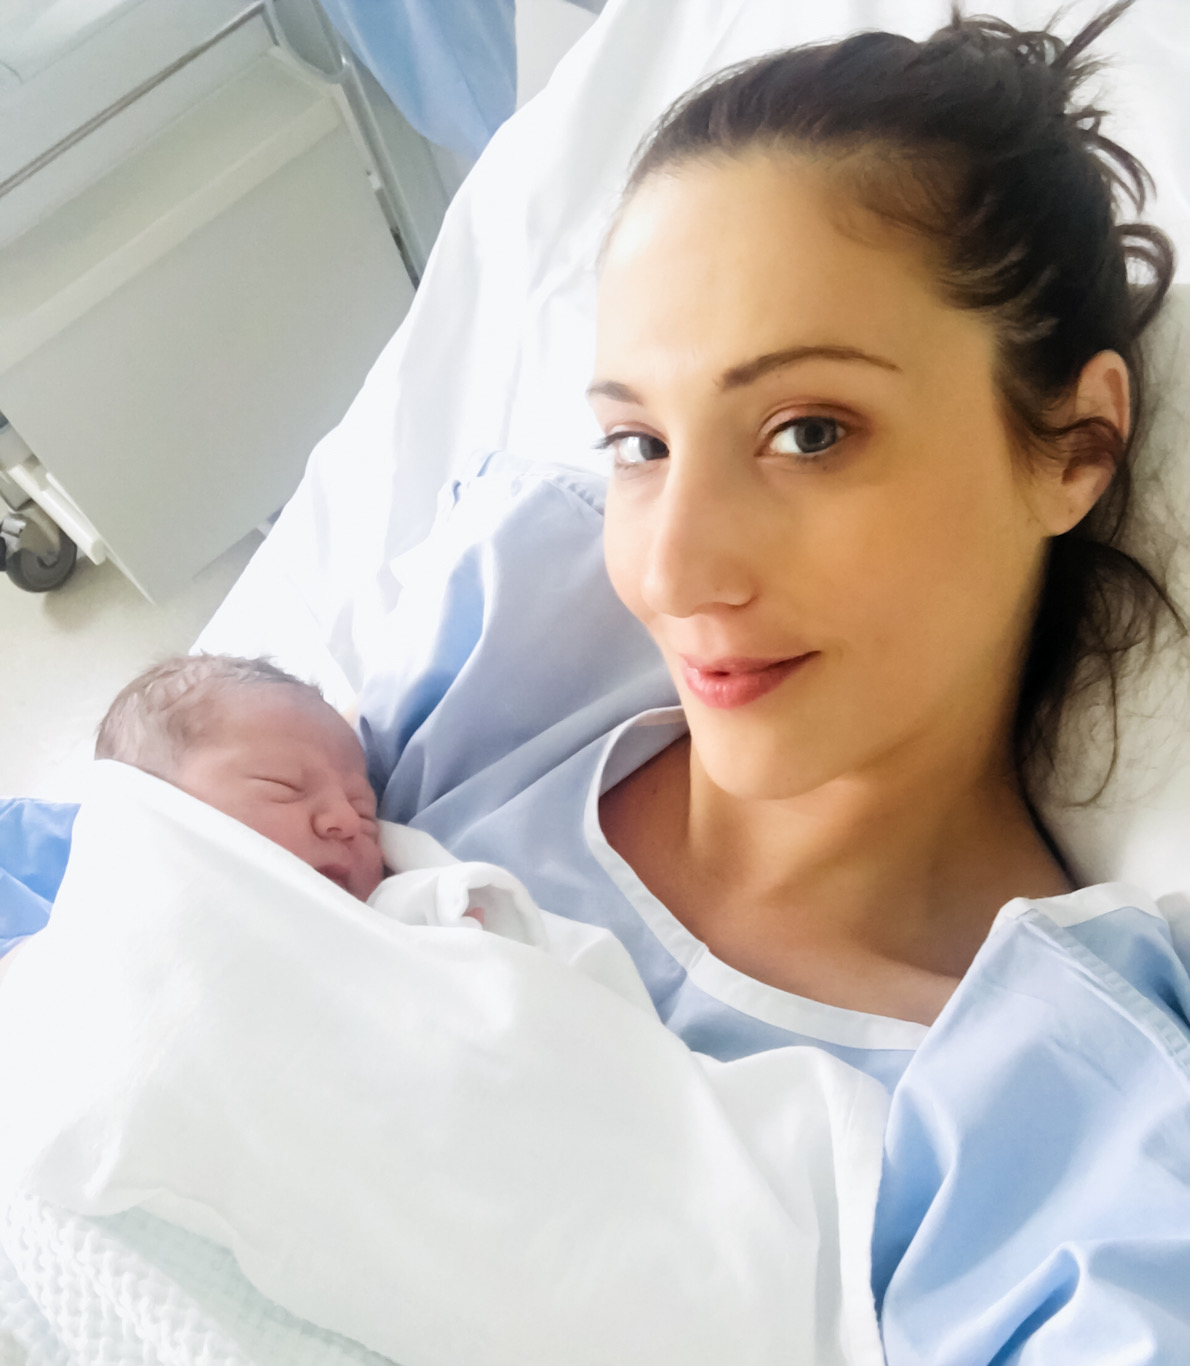 personal birth story, new mom to baby boy, birth labor delivery experince